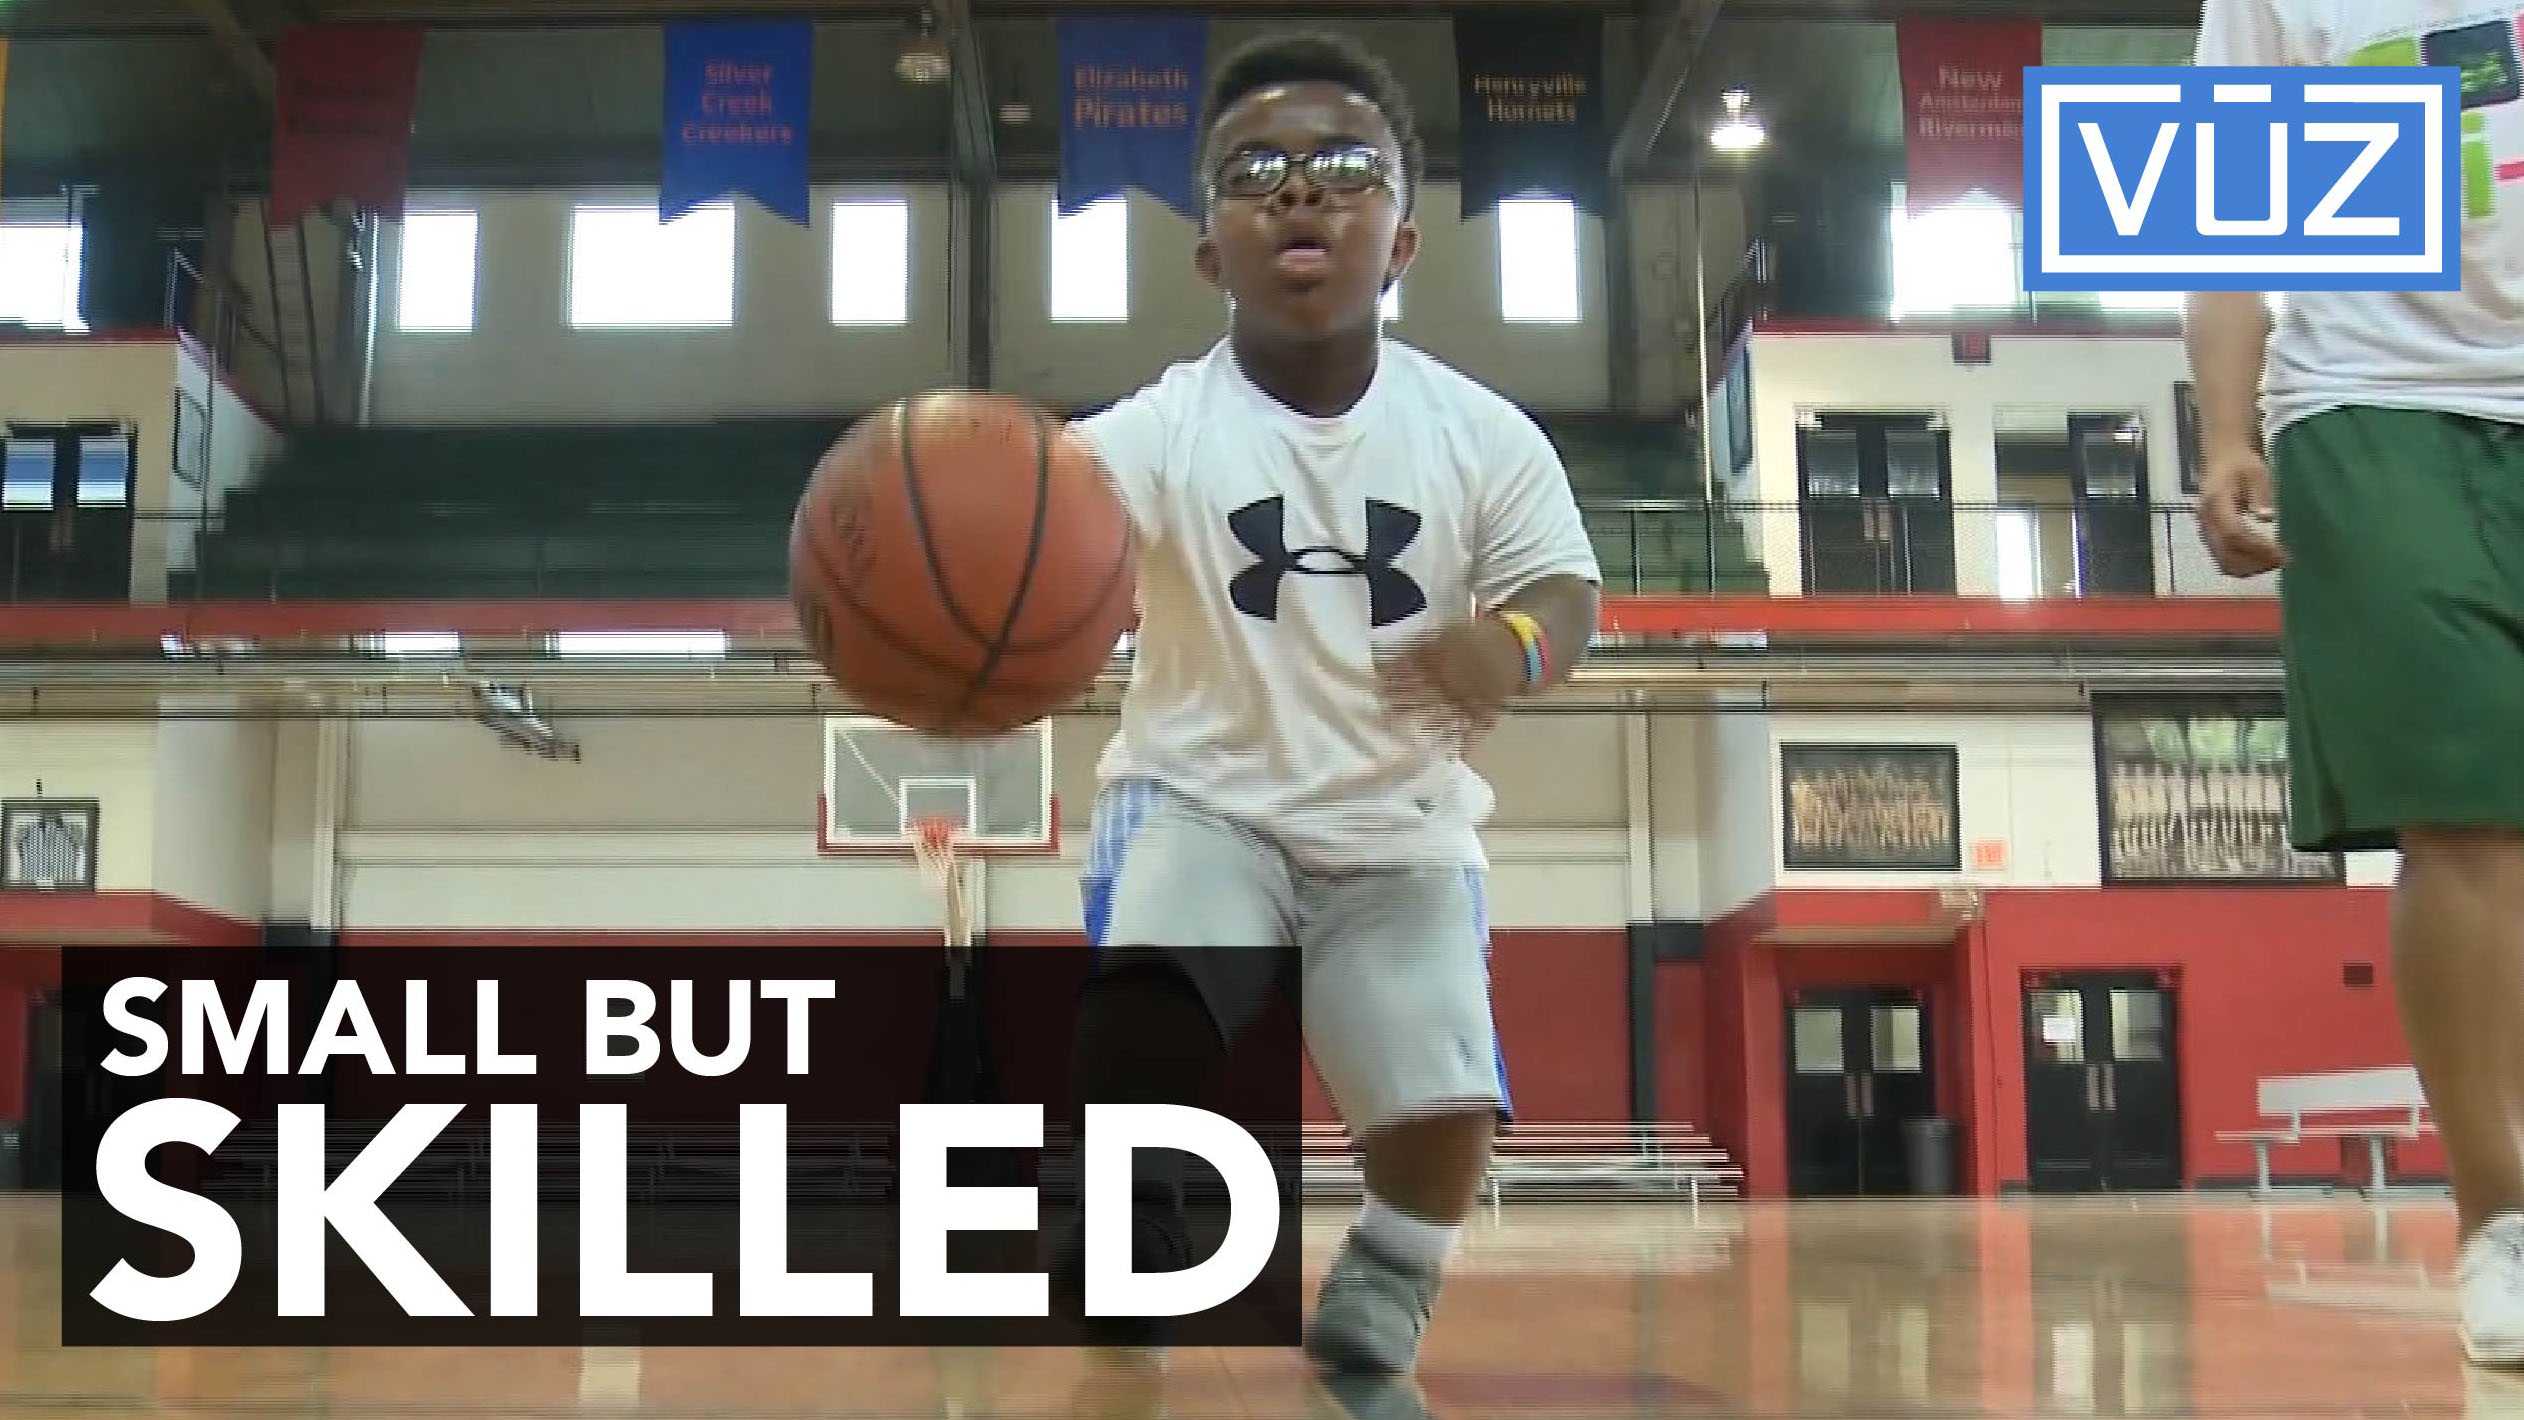 10-year-old doesn't let small size stop him from being a basketball star